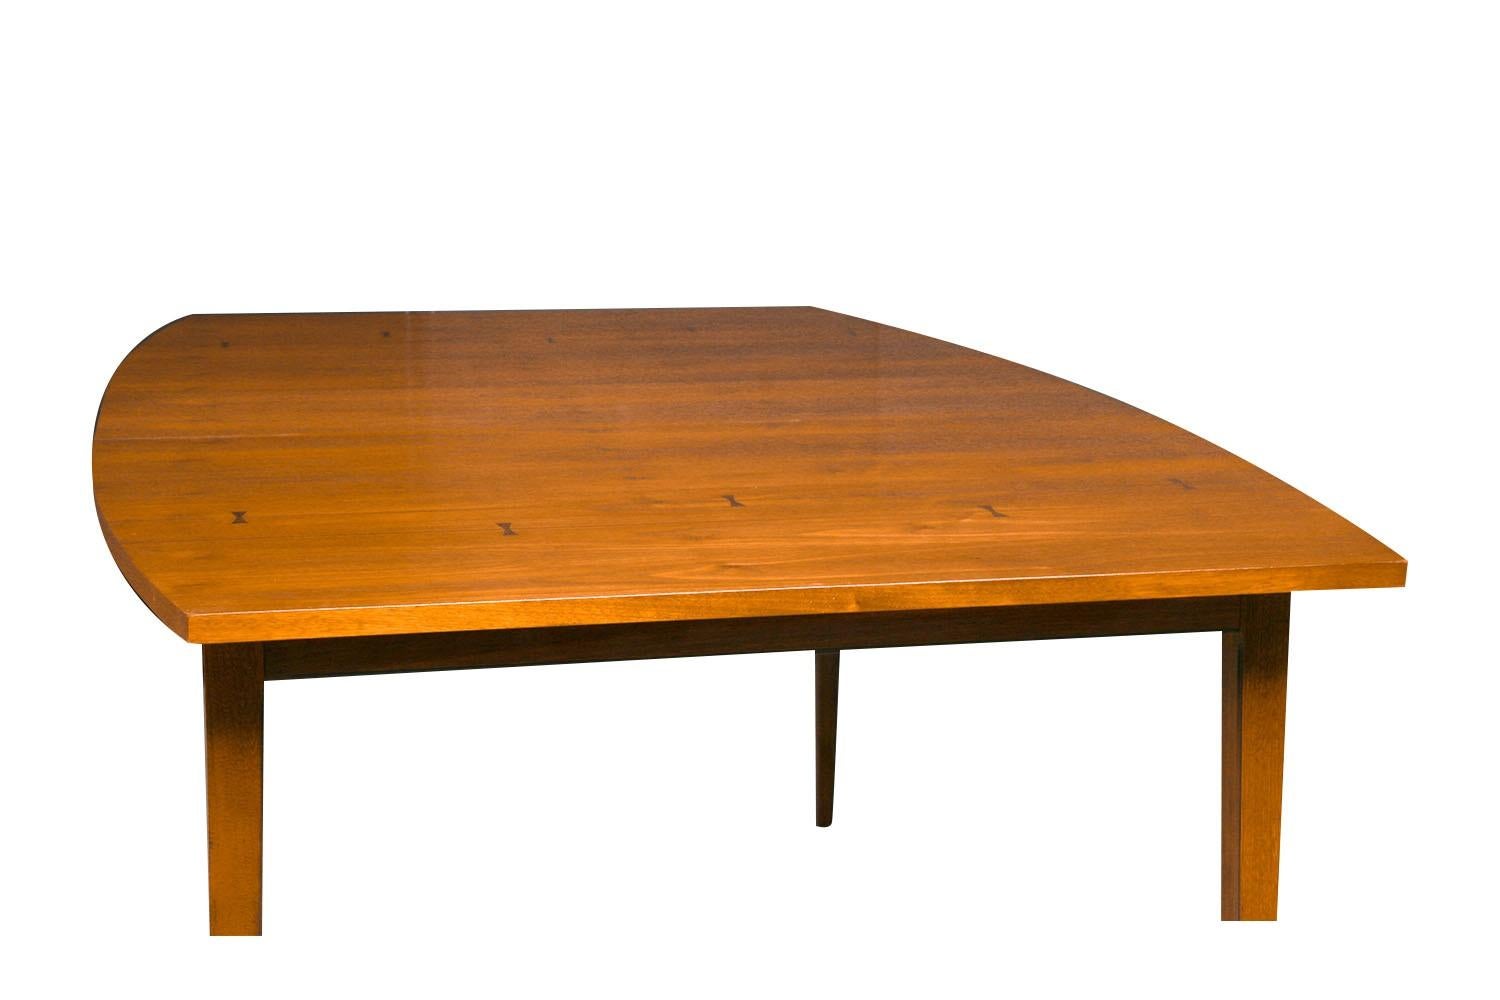 Beautiful Mid-Century Modern expandable, Bow Tie Tuxedo Dining Table, in great original condition, manufactured by Lane. Features richly grained, walnut top clean lines accented with ebony pinstripes and rosewood inlaid bow ties. Raised over four